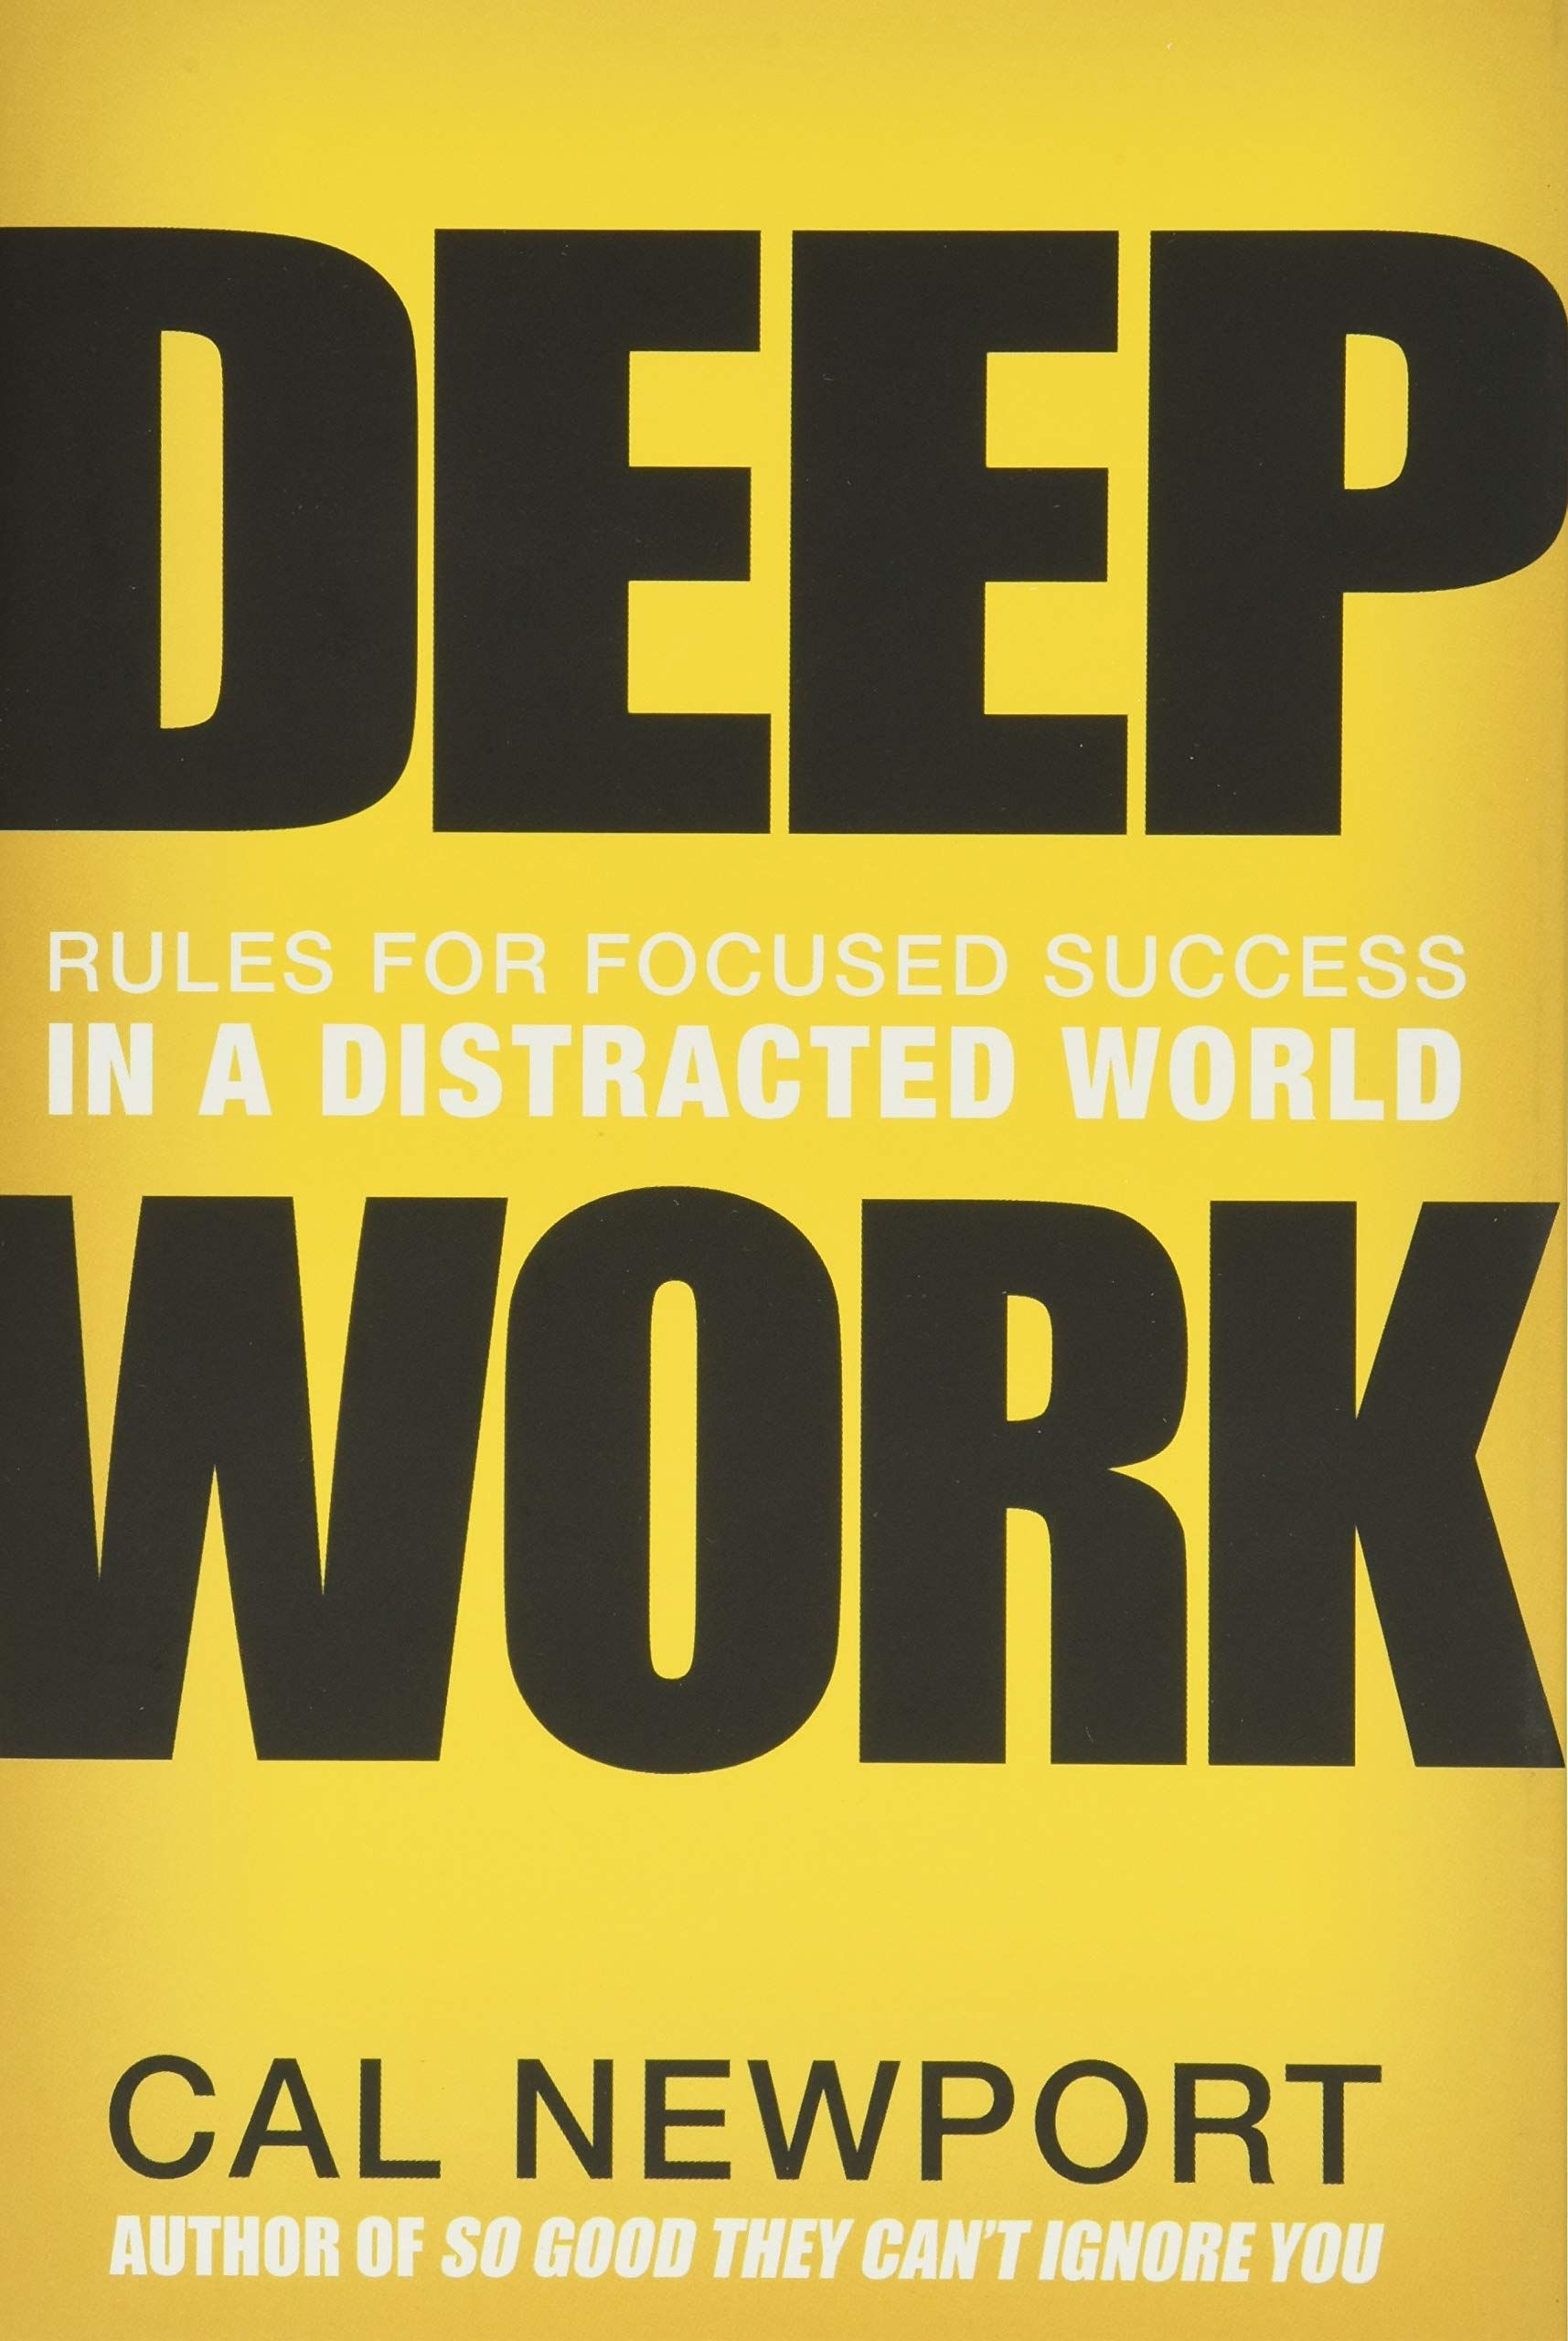 Deep Work: Rules for Focused Success in a Distracted World | Amazon (US)